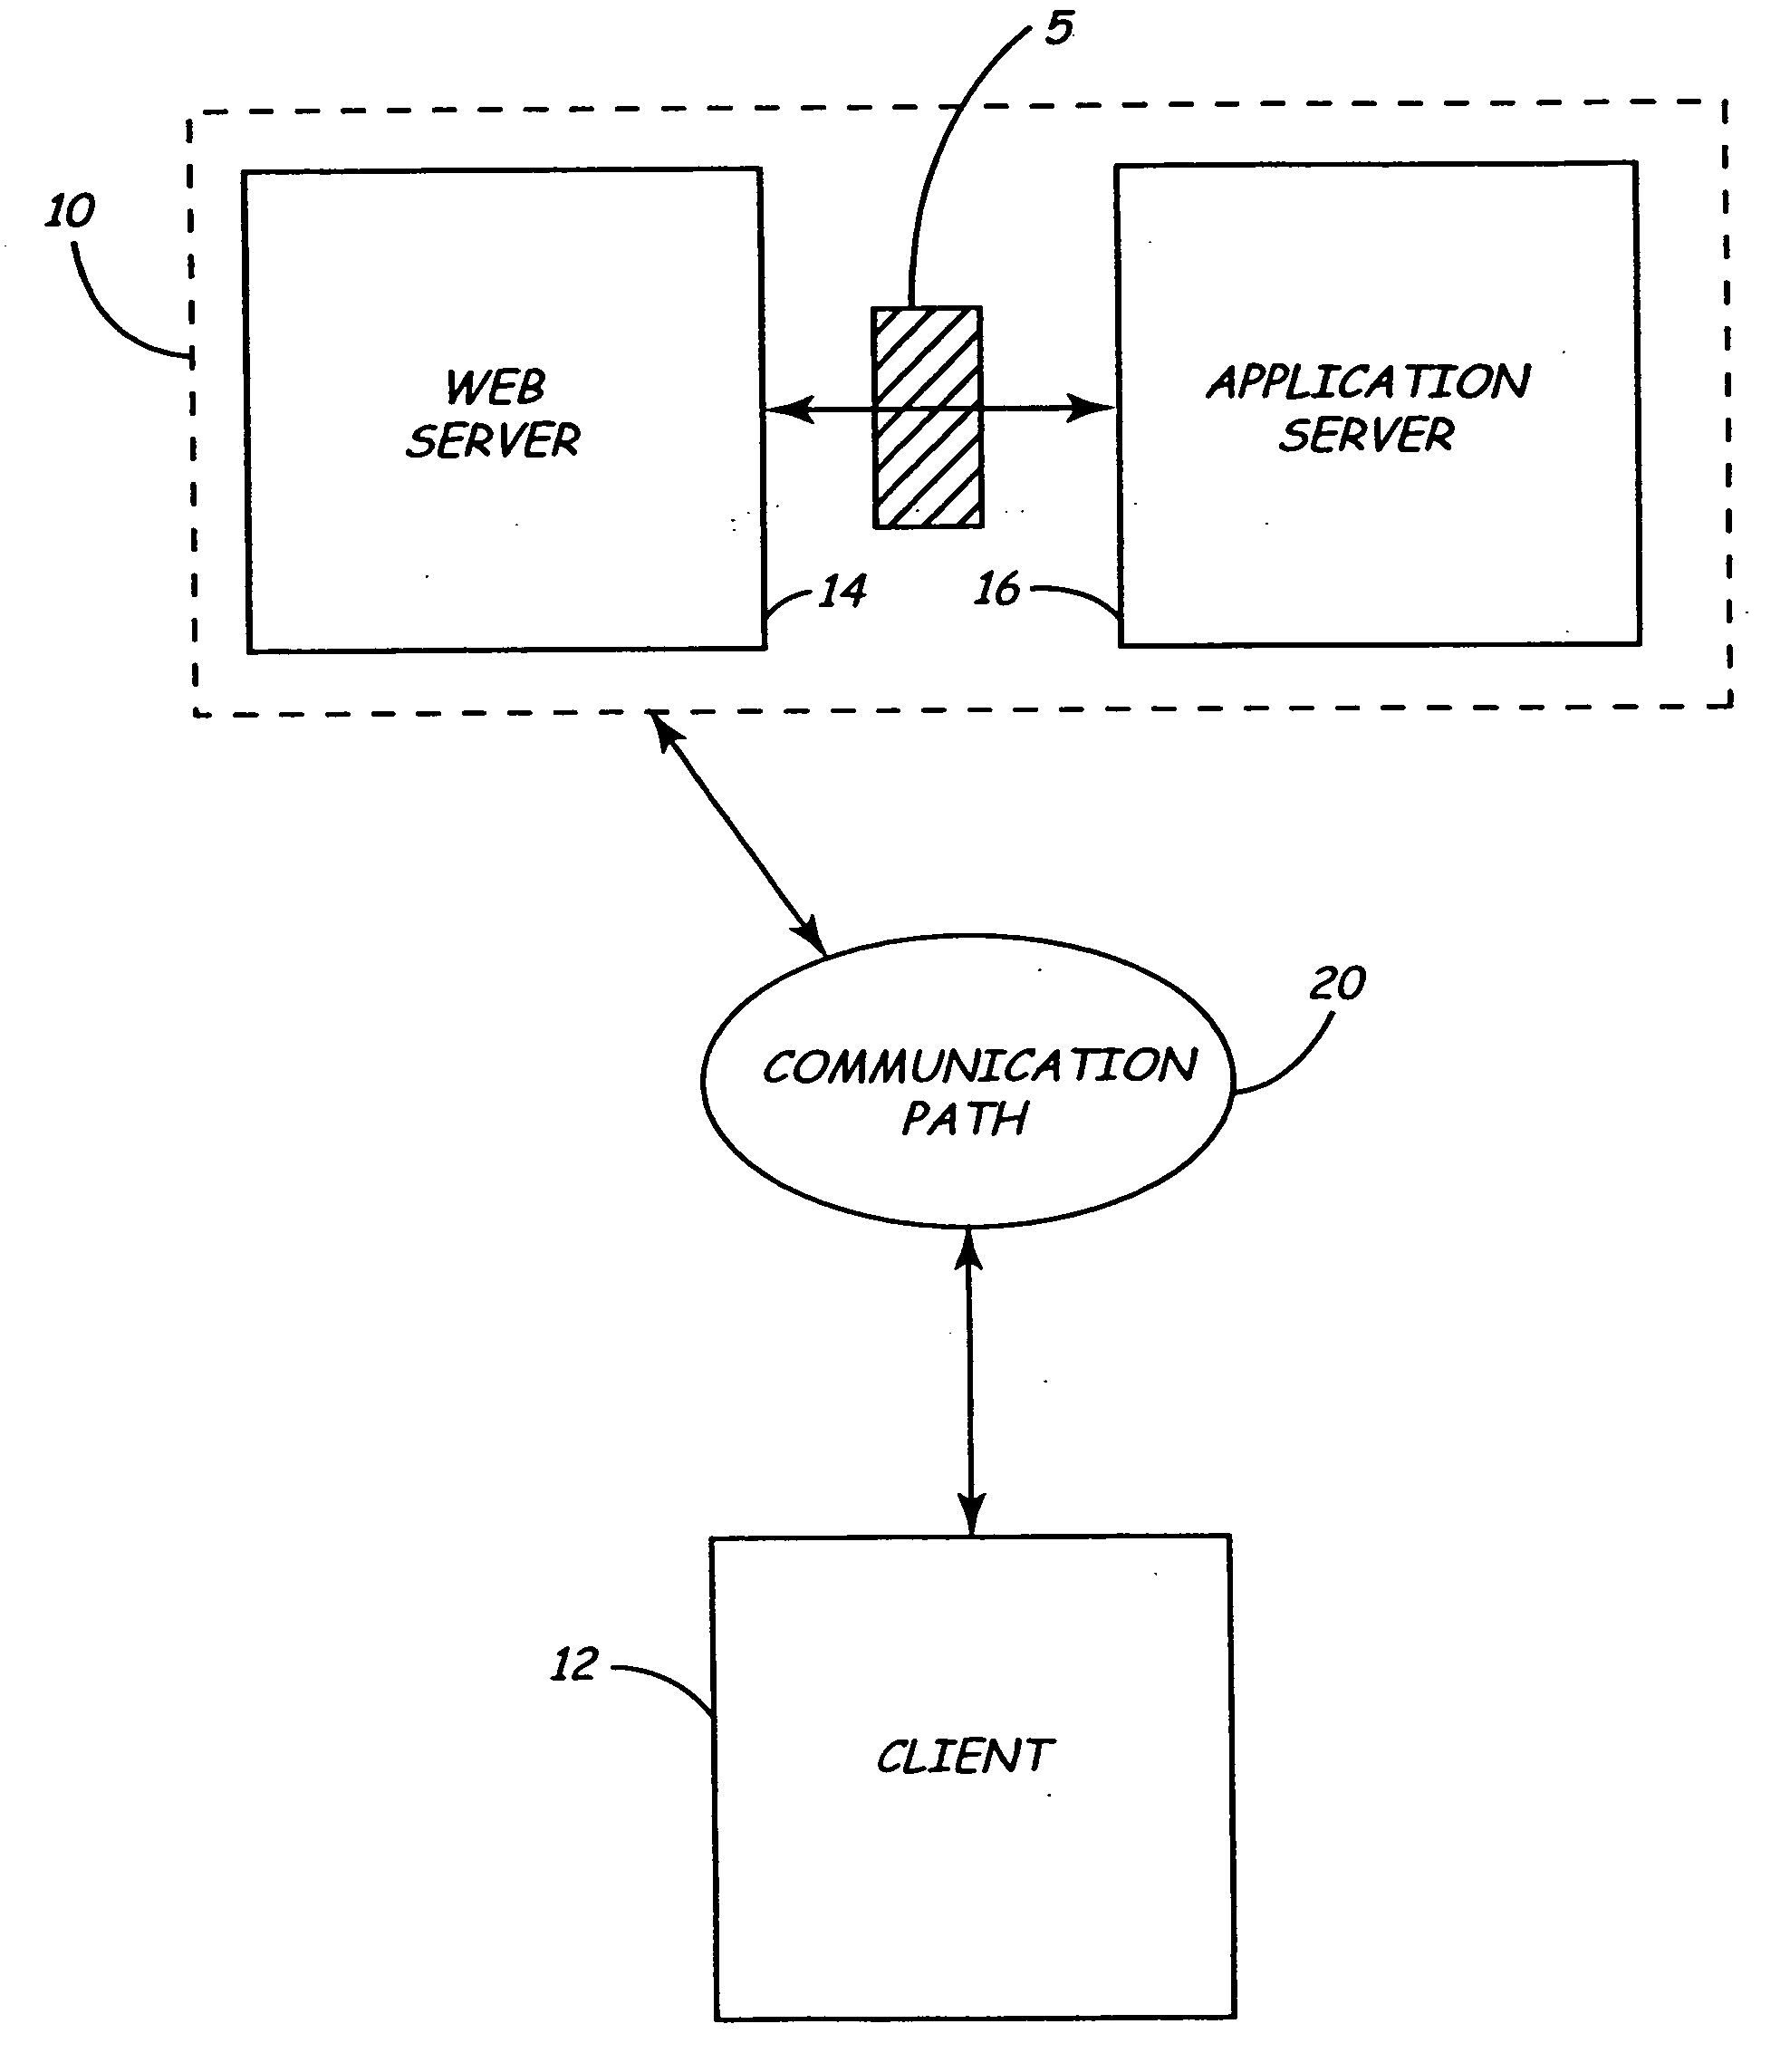 Method and sytem for developing technical configurations